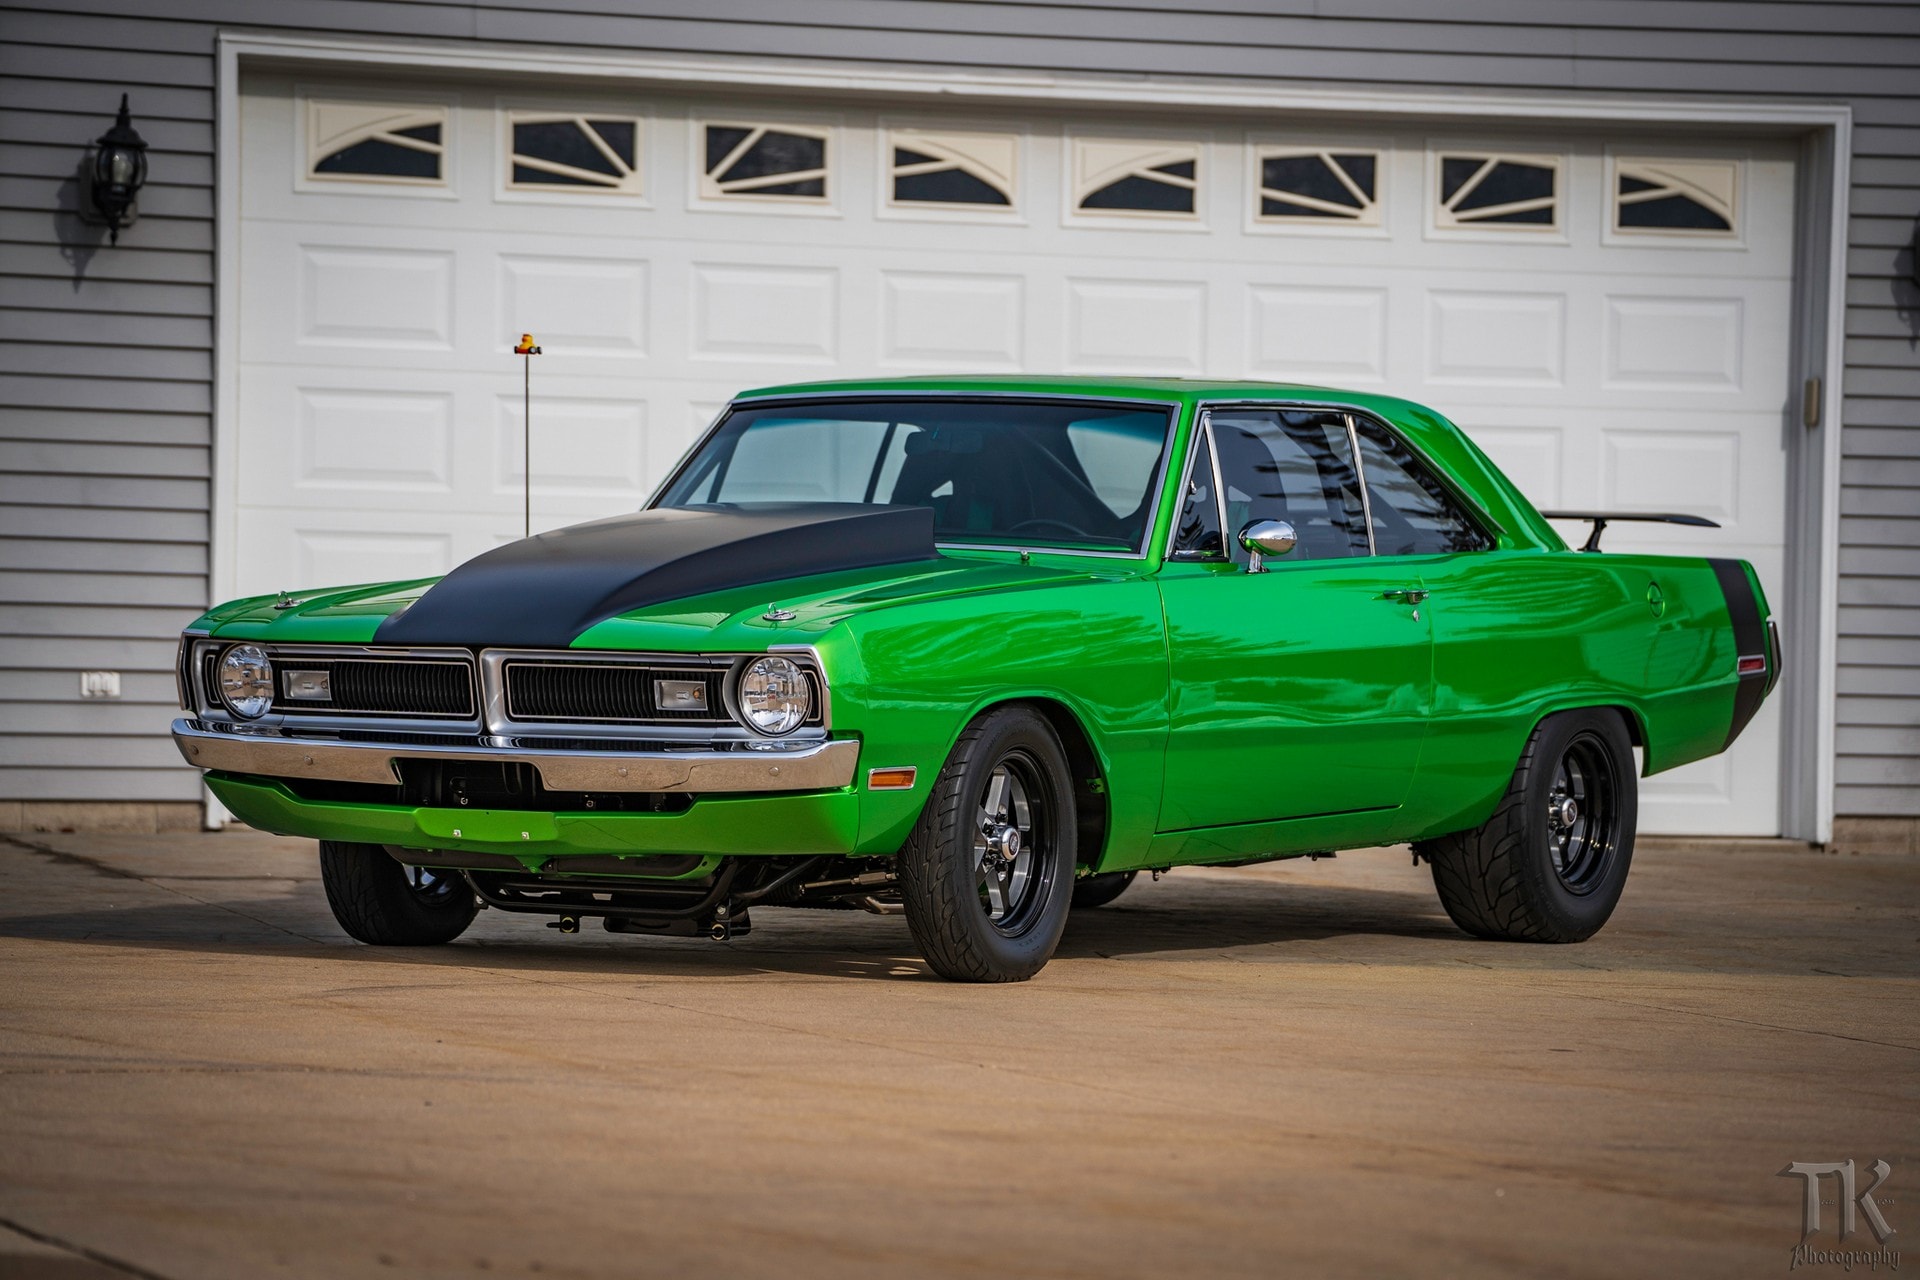 This 1971 Dodge Dart Custom Is Awesomely Real; the 451 V8 Is No Joke Under the Chevy Cowl pic pic photo